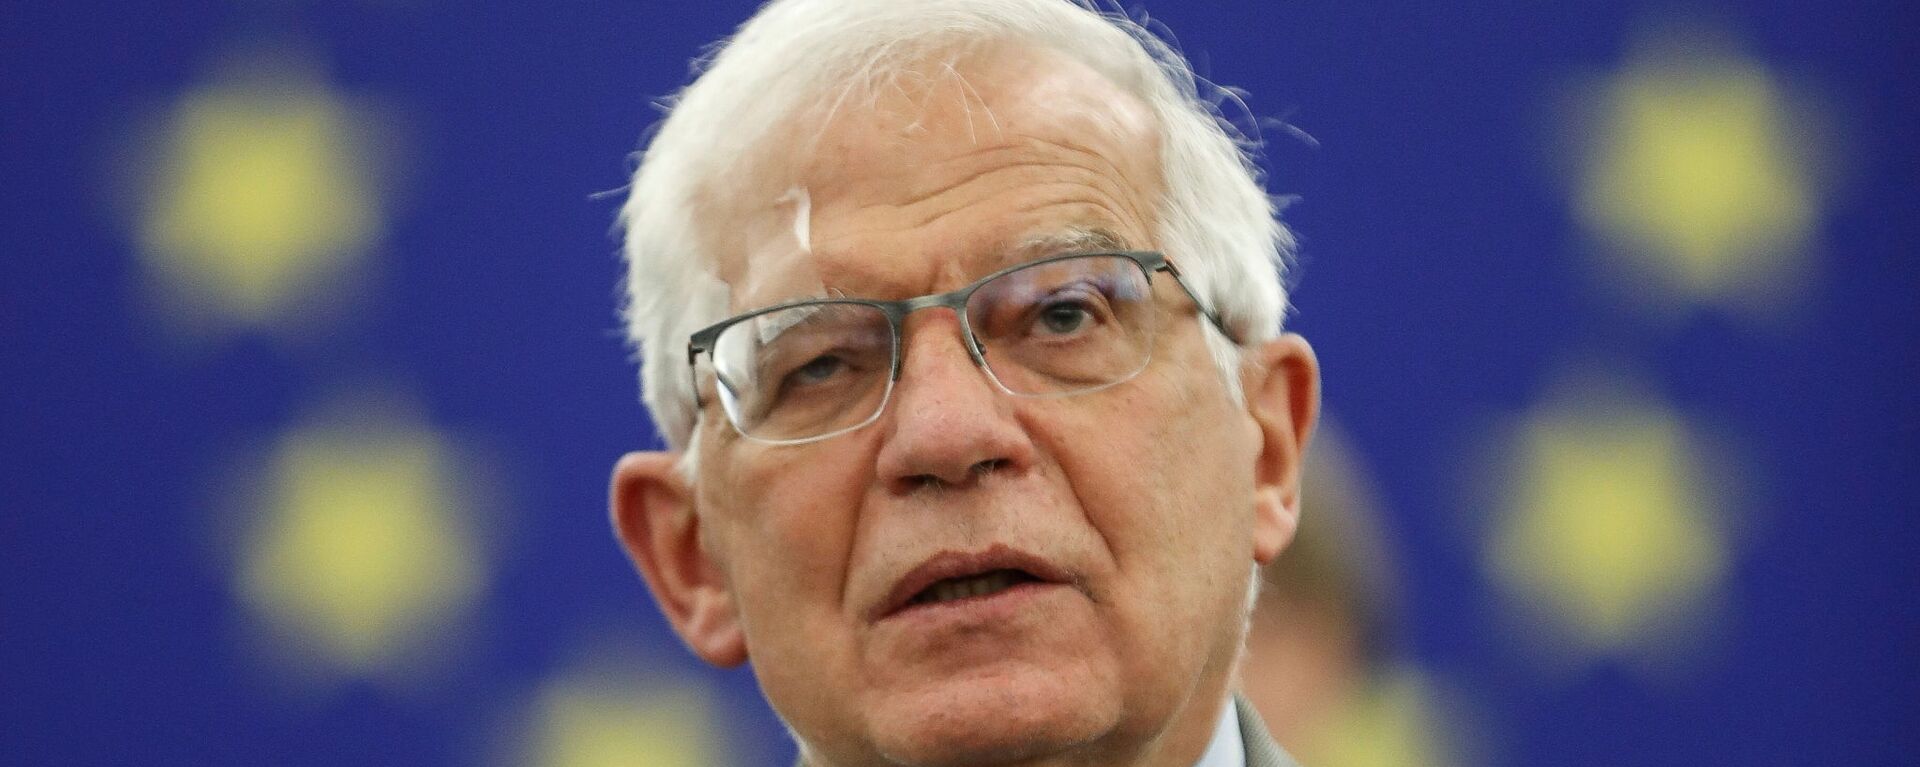 FILE PHOTO: Josep Borrell, vice president of the European Commission in charge of coordinating the external action of the European Union, delivers a speech at the European Parliament, in Strasbourg, France, June 8, 2021 - Sputnik International, 1920, 08.09.2021